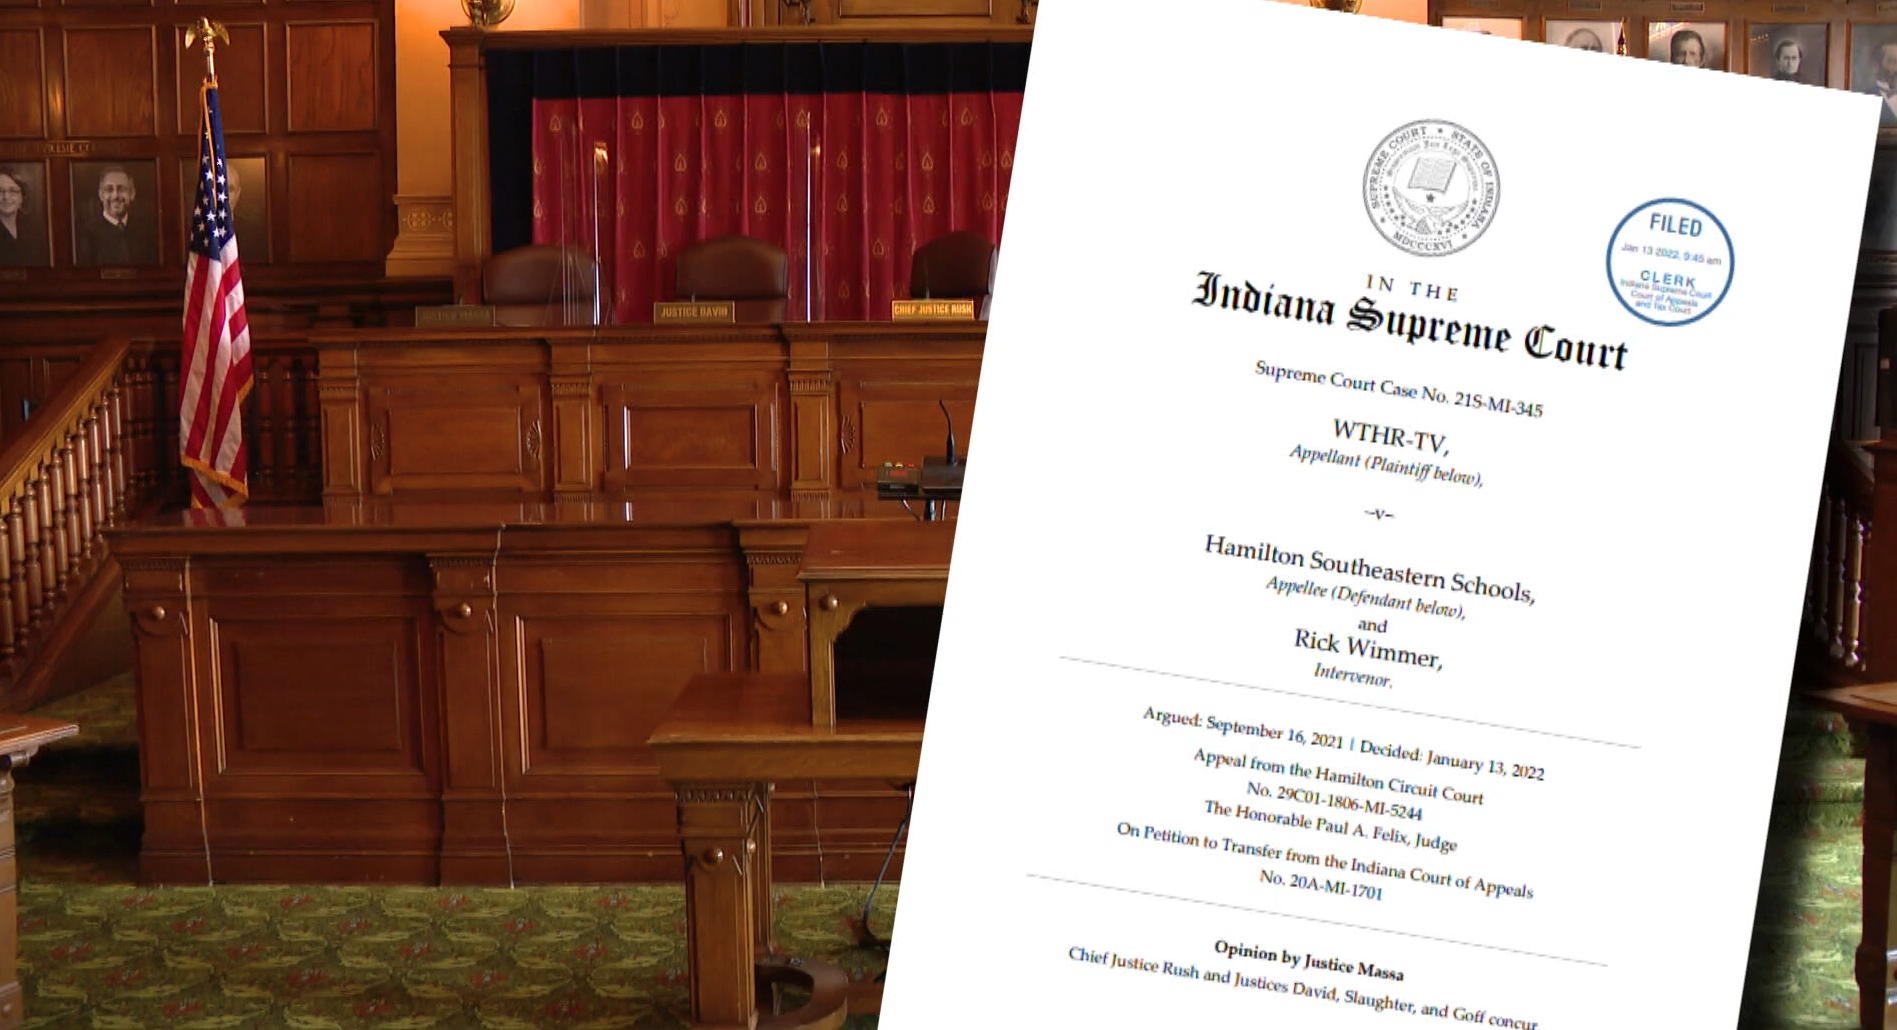 Indiana SC: Agencies must provide 'factual basis' for employee